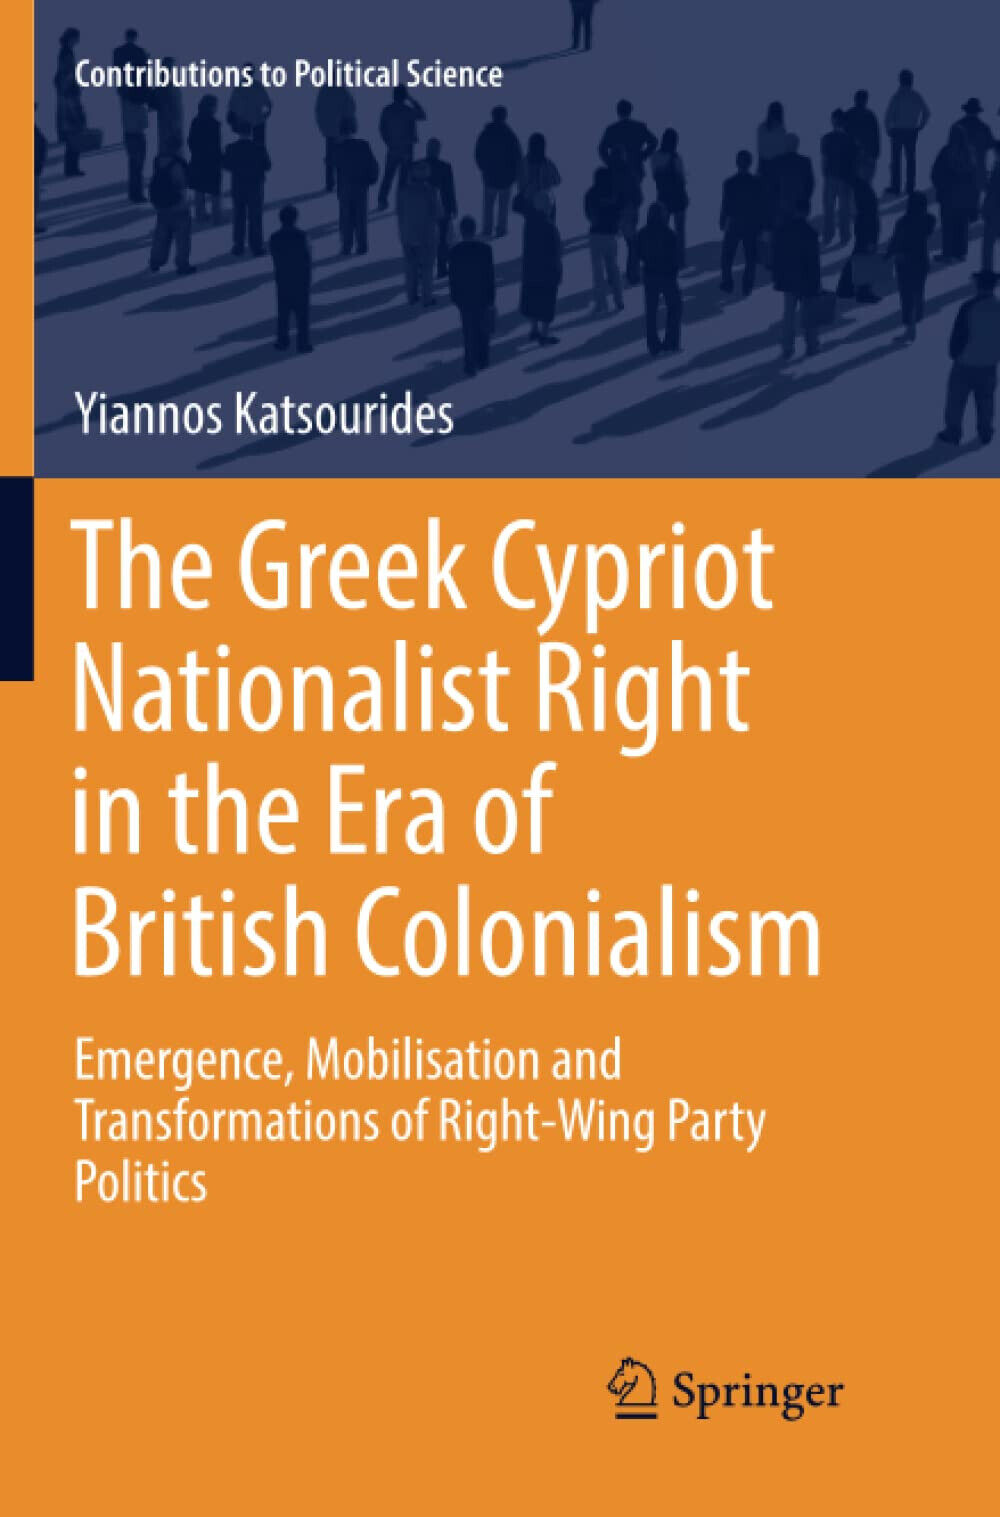 The Greek Cypriot Nationalist Right in the Era of British Colonialism - 2018